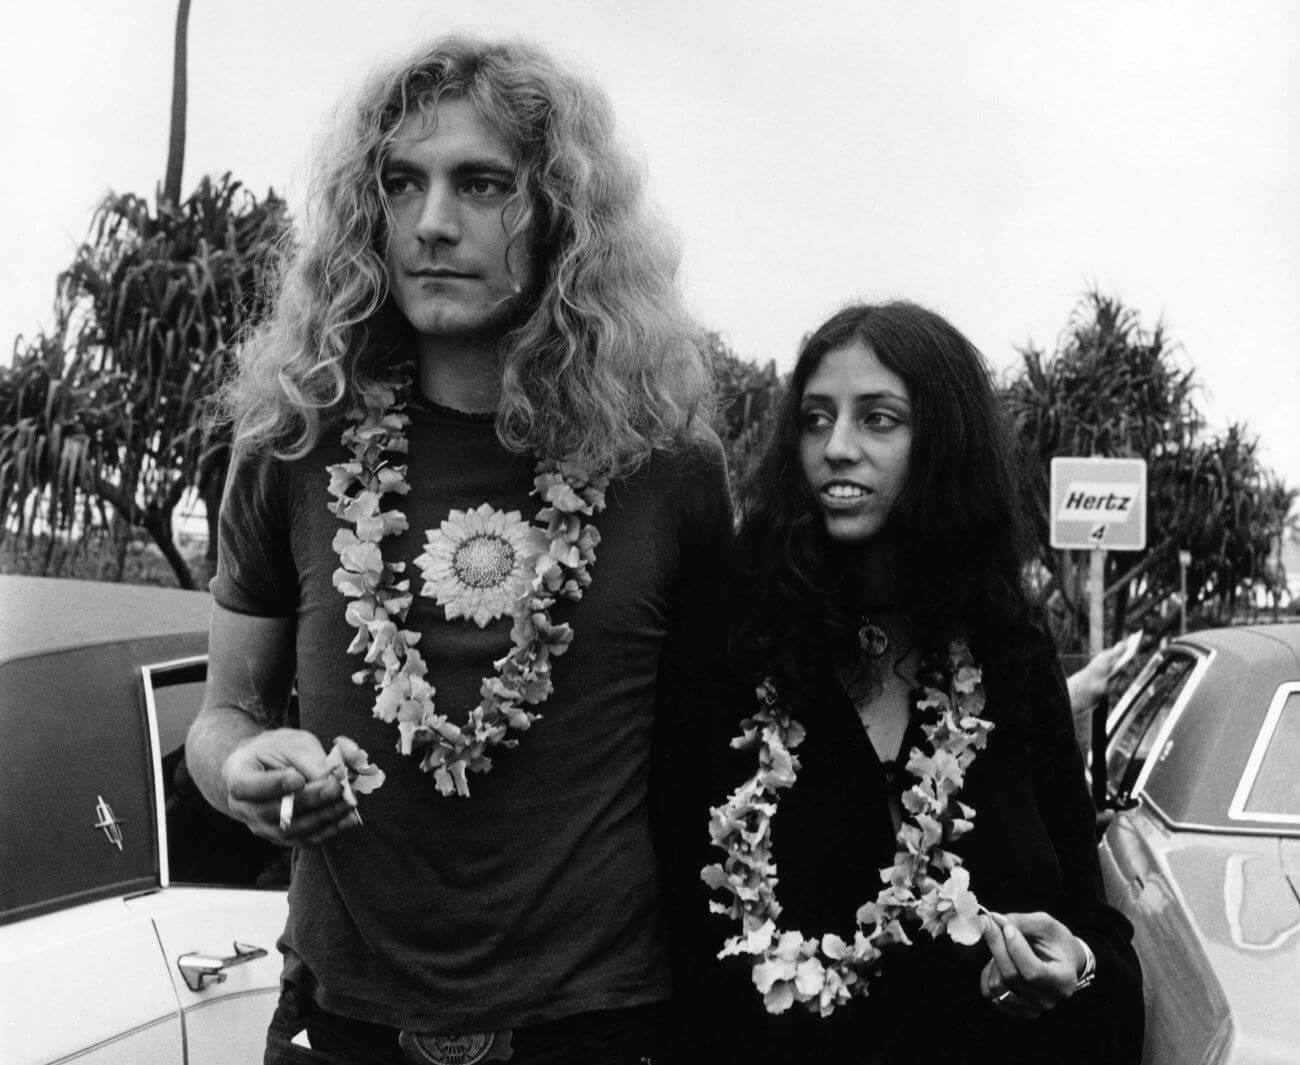 A black and white picture of Robert Plant and Maureen Wilson wearing leis and standing in front of cars.